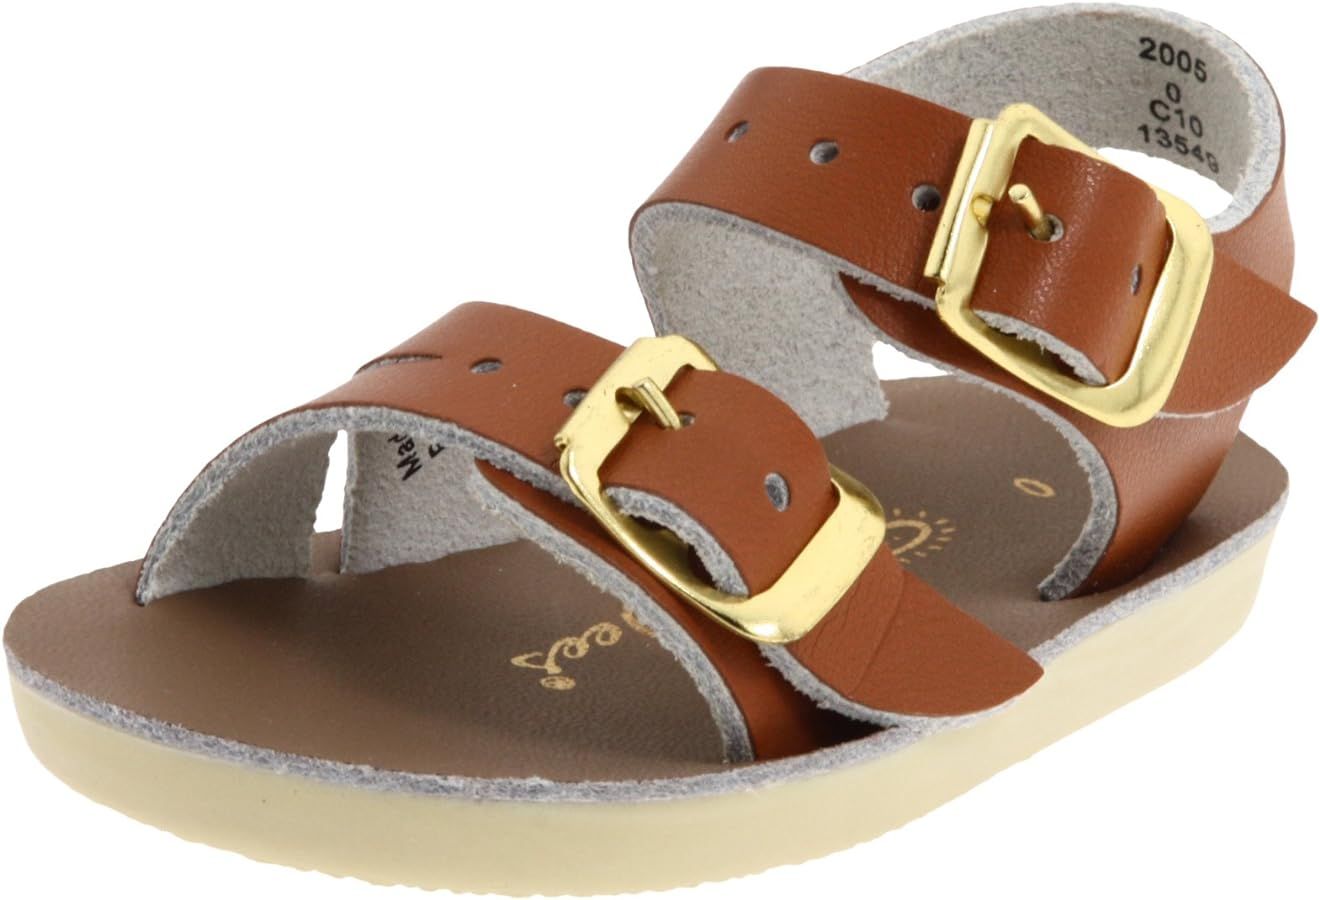 Salt Water Sandals Girls' Sea Wees Hoy Shoes | Amazon (US)